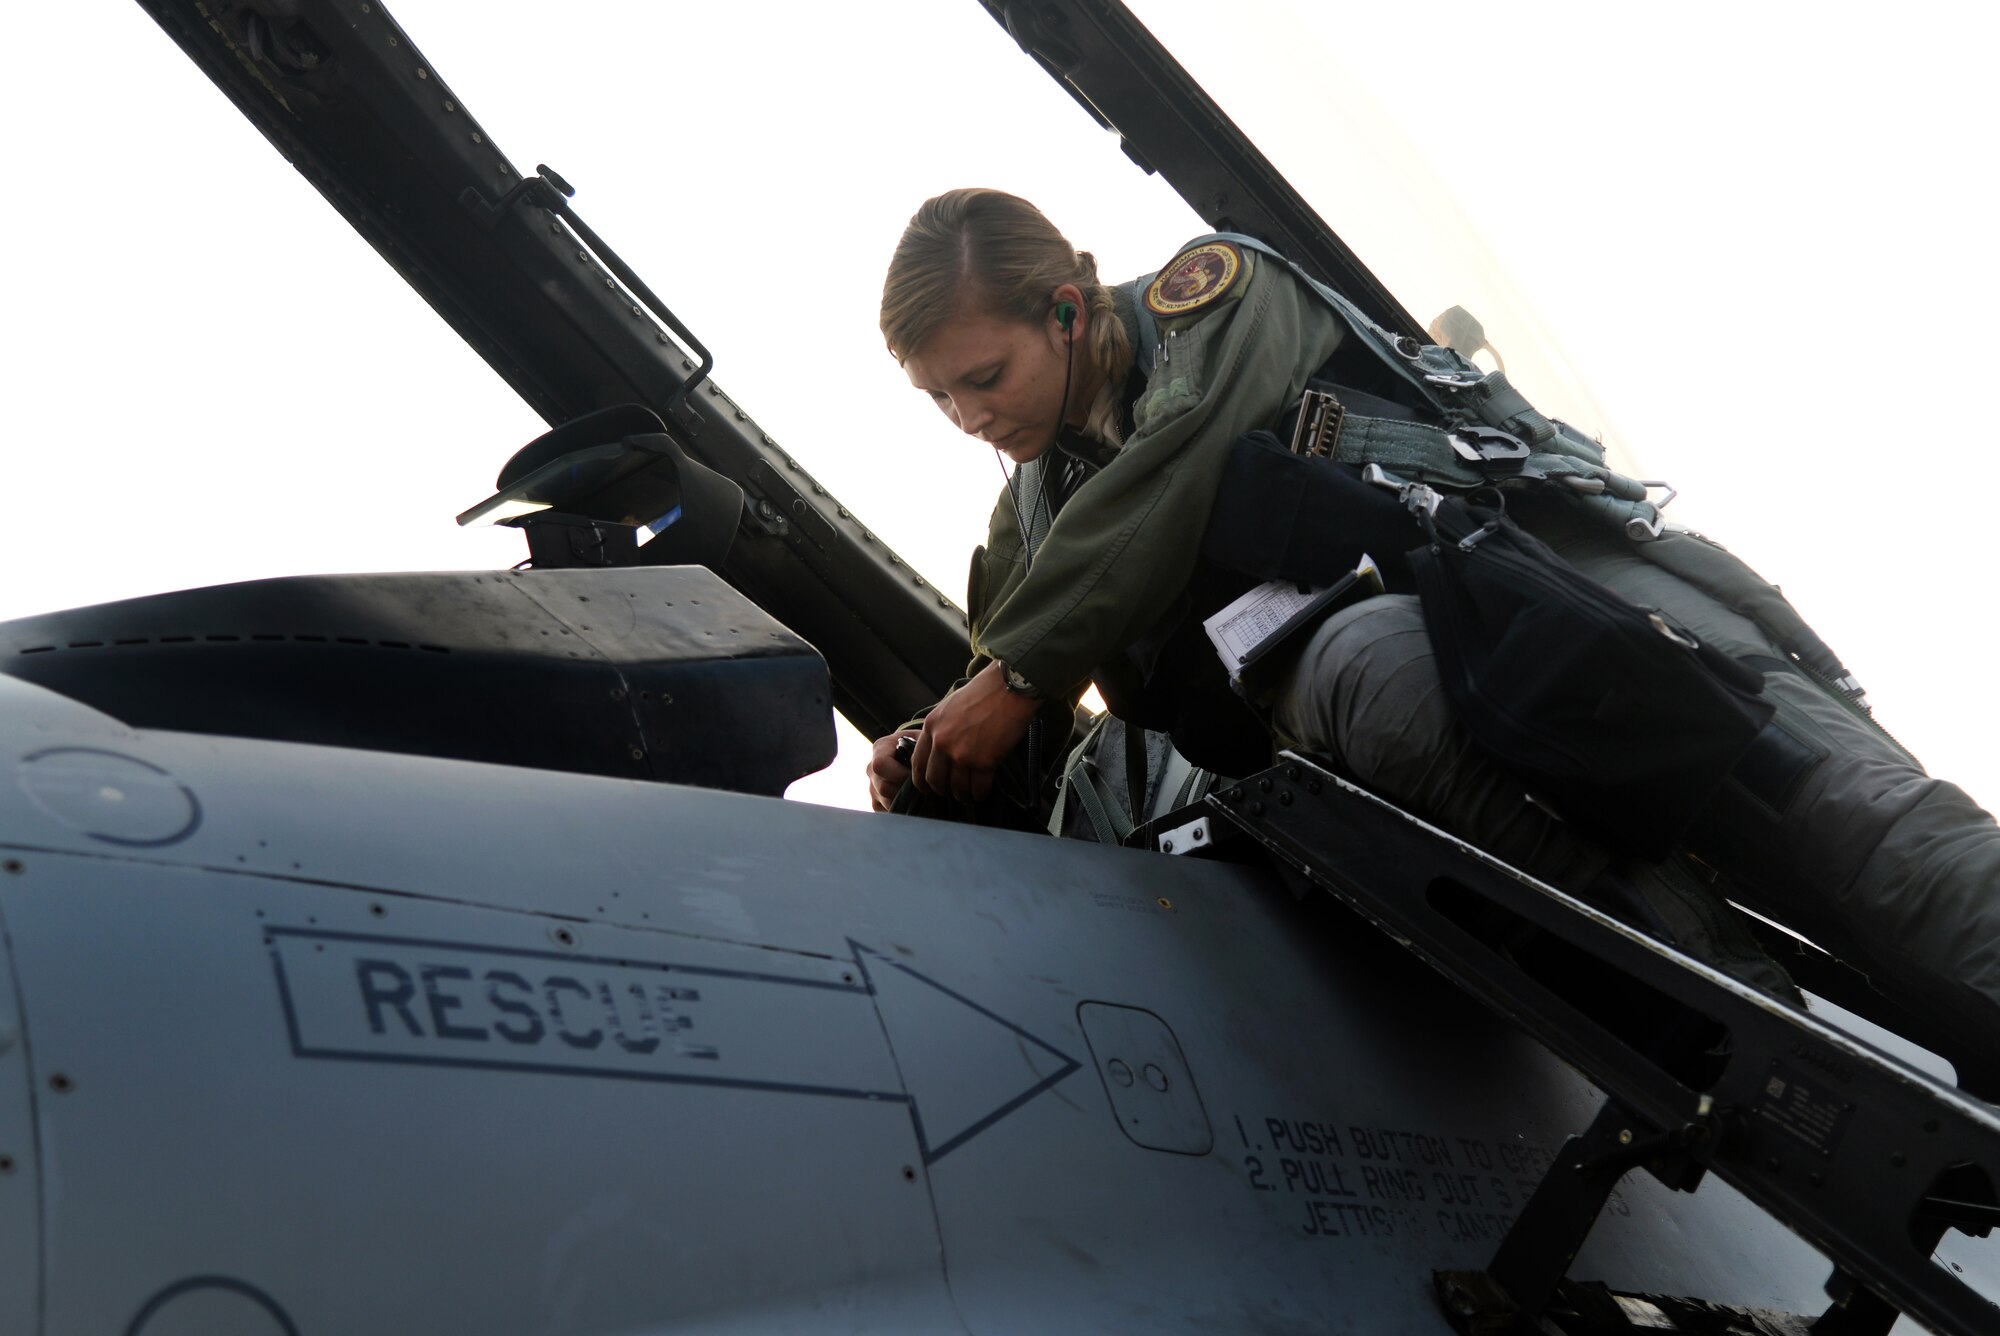 U.S. Air Force 1st Lt. Brittany Trimble, 36th Fighter Squadron pilot, plugs her air flight crew equipment into an F-16 Fighting Falcon before takeoff, Feb. 15, 2016, at Korat Royal Thai Air Force Base, Thailand. Women were first allowed to enter pilot training in 1976 and in 1993 women were finally authorized to enter fighter pilot training. Trimble is one of only 676 female pilots who serve in the U.S. Air Force. There are 12,823 pilots Air Force wide. (U.S. Air Force photo by Staff Sgt. Amber E. Jacobs)